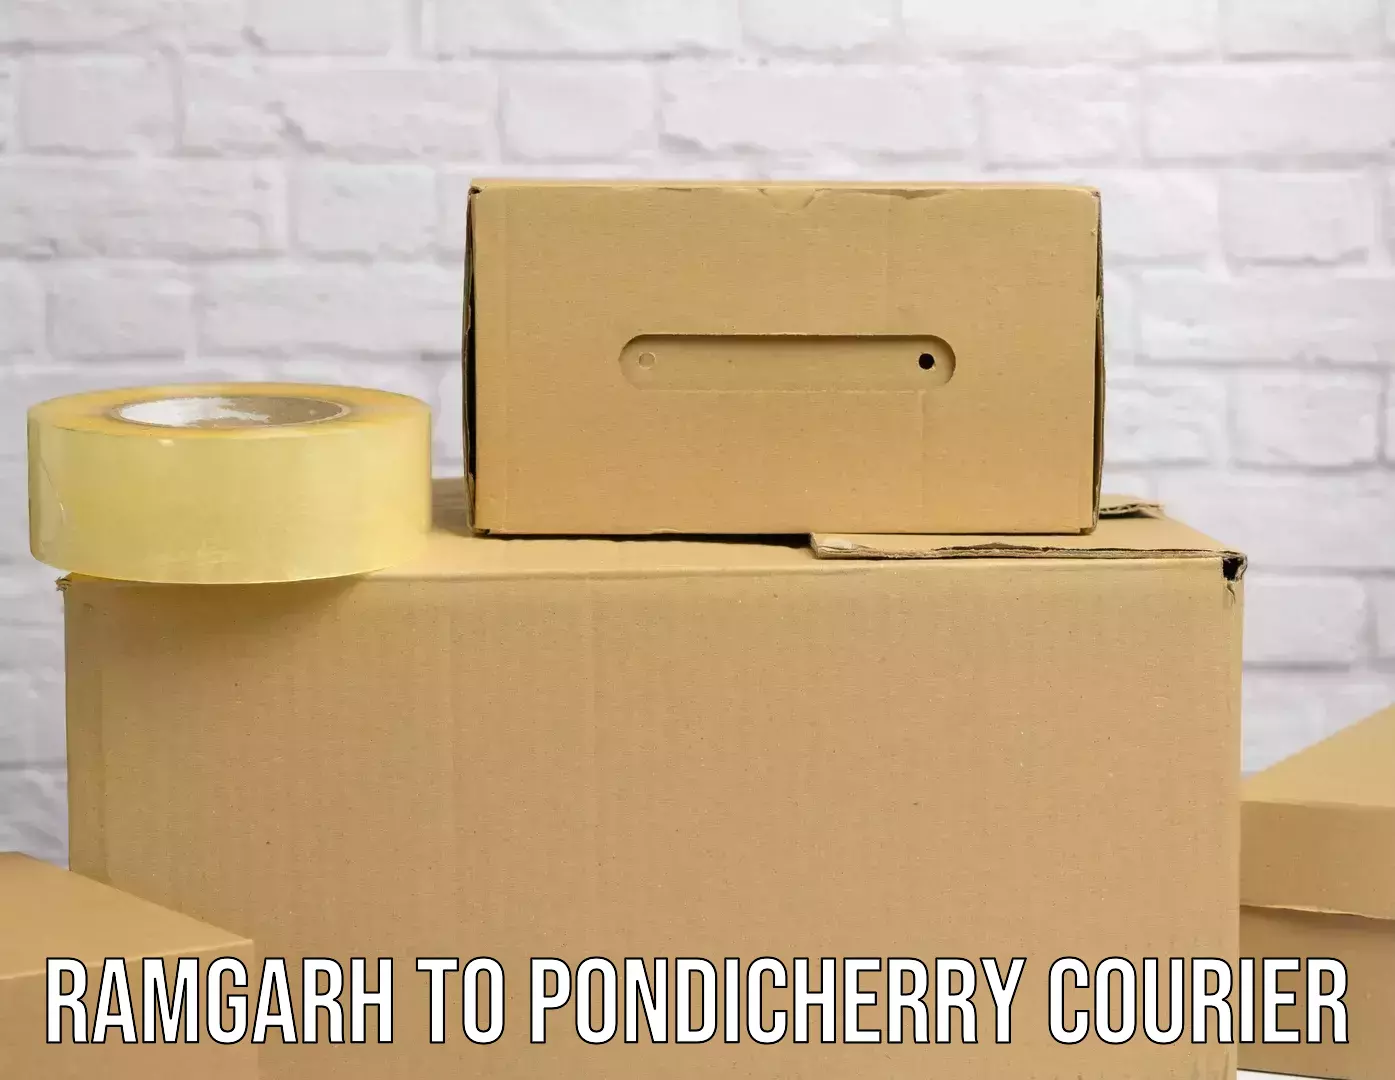 User-friendly delivery service Ramgarh to Pondicherry